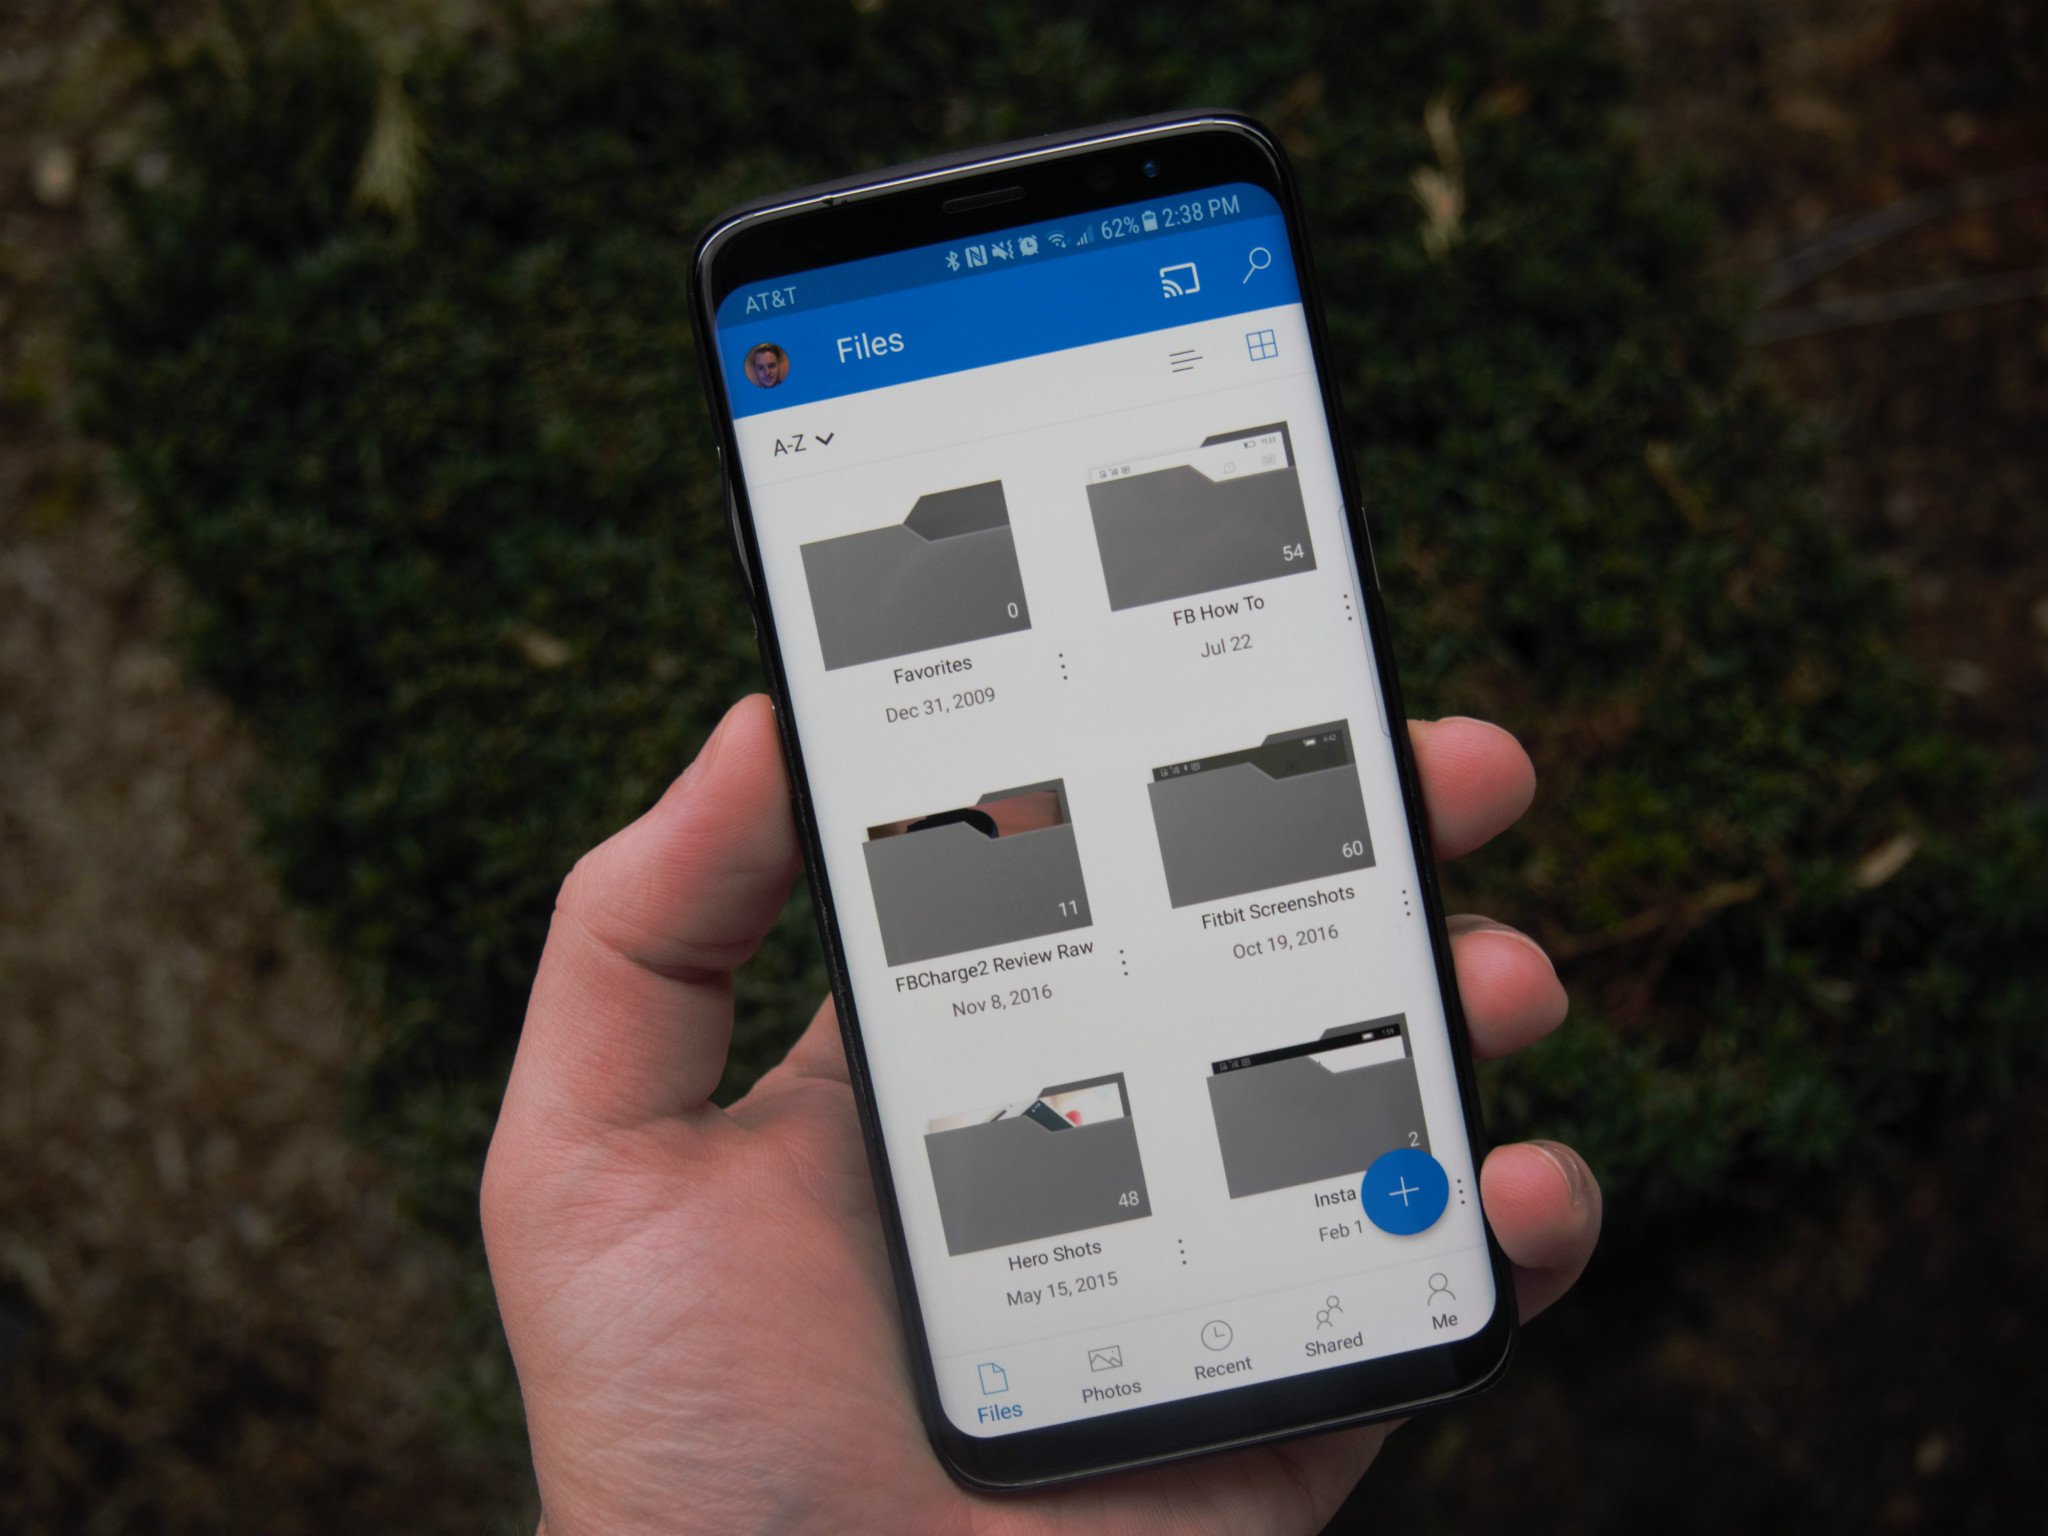 OneDrive for Android gets fresh coat of paint, ditches hamburger menu